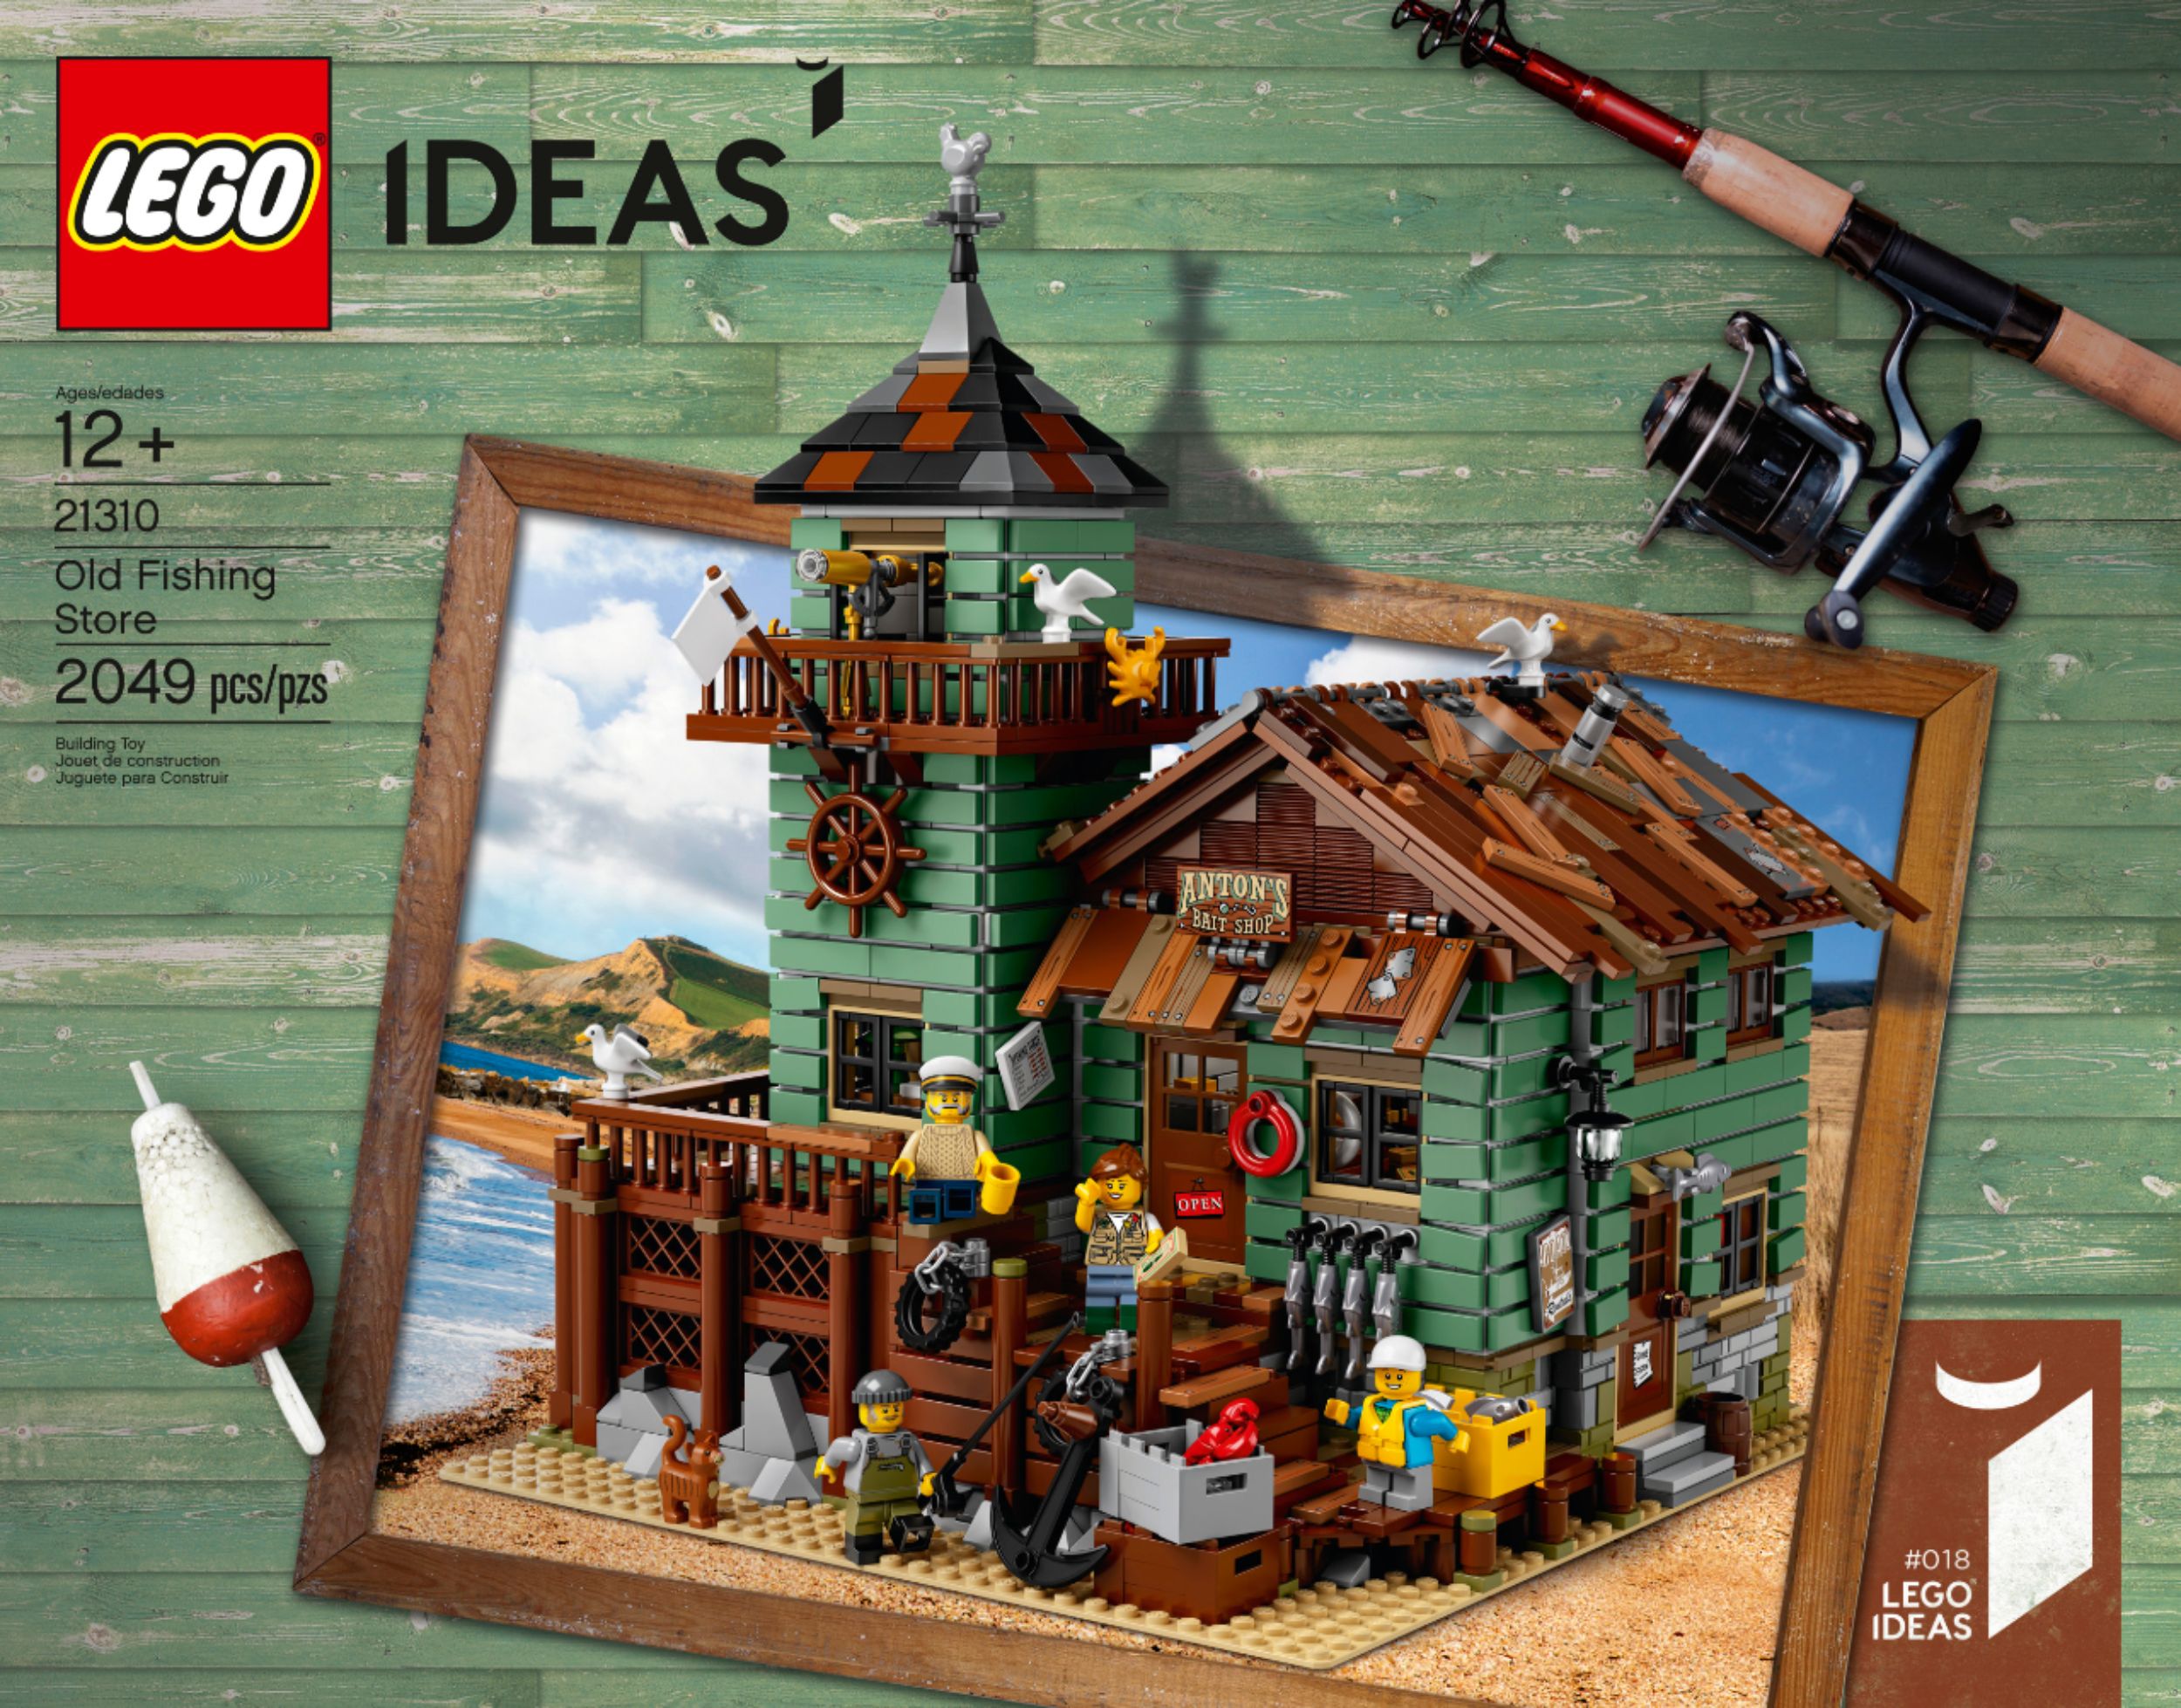 The LEGO 21310 Old Fishing Store combines rustic charm with